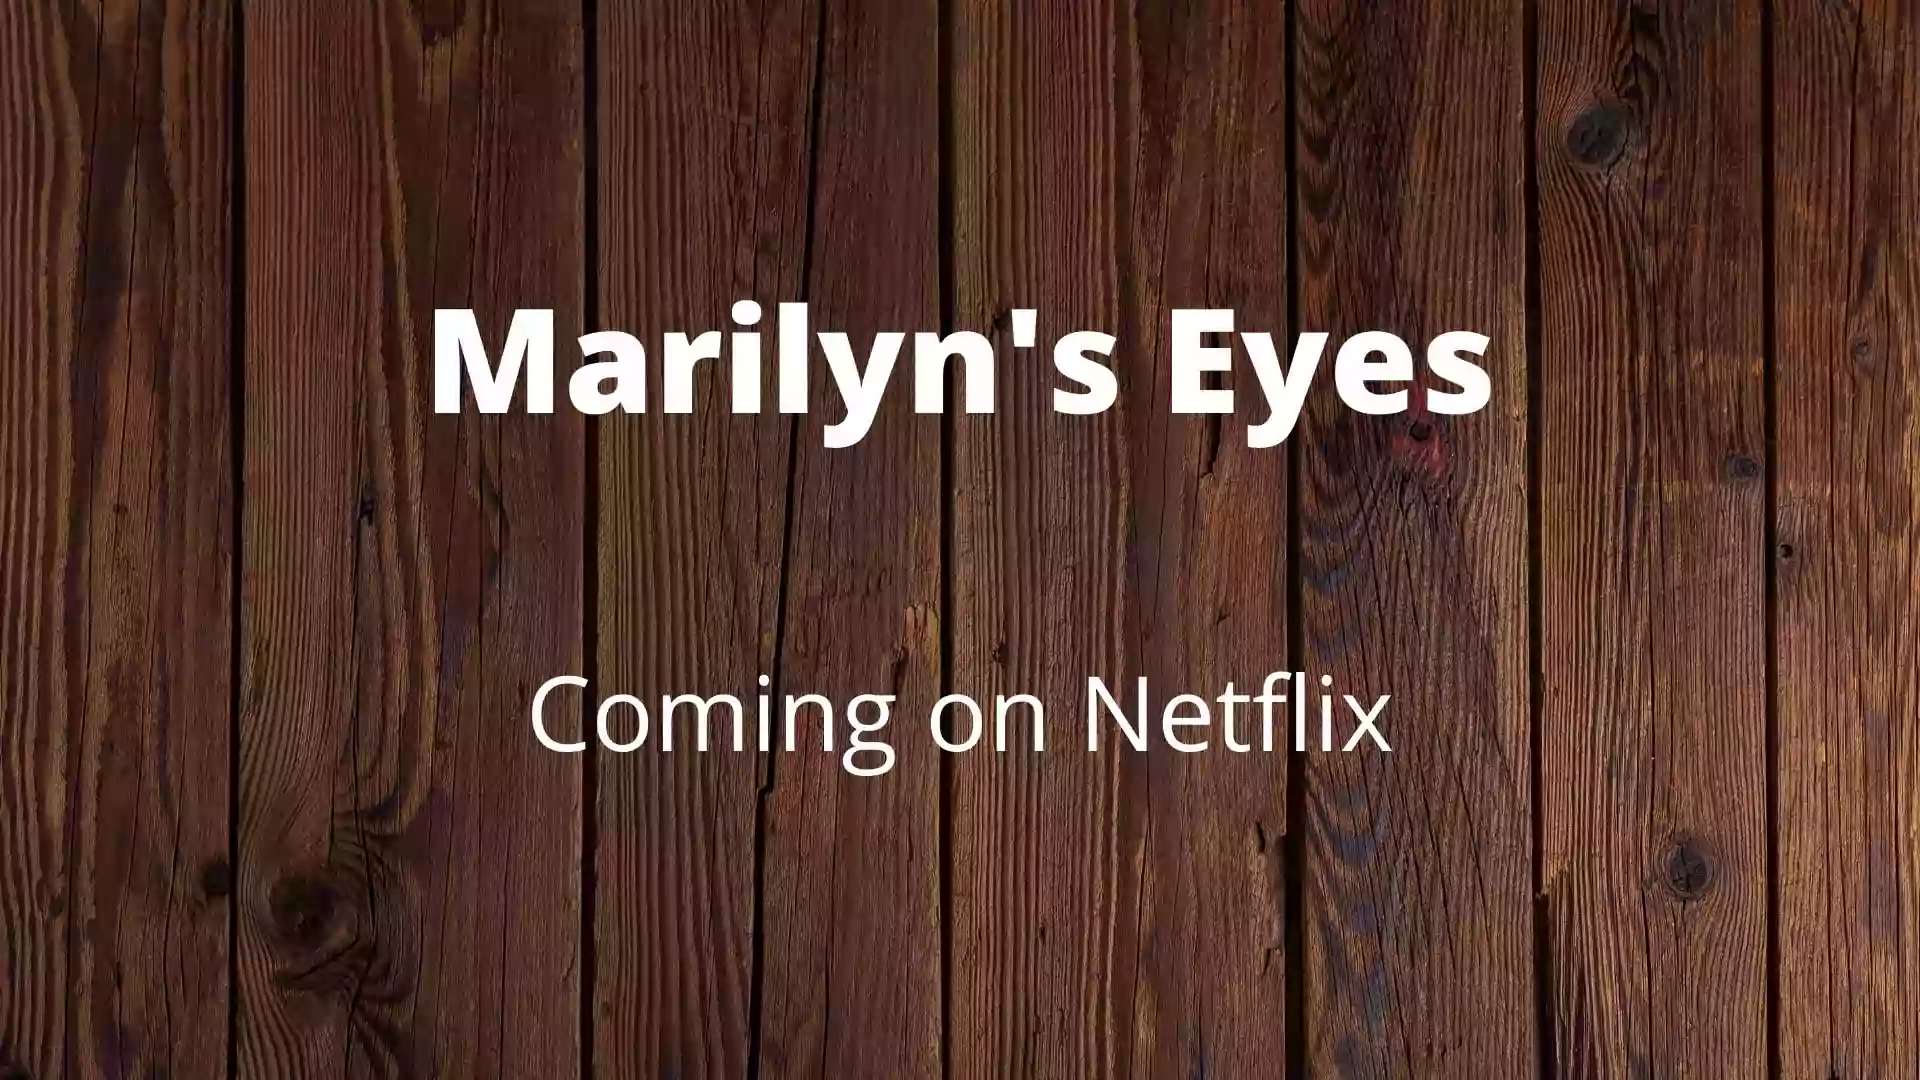 Marilyn's Eyes Parents Guide and age rating |2021